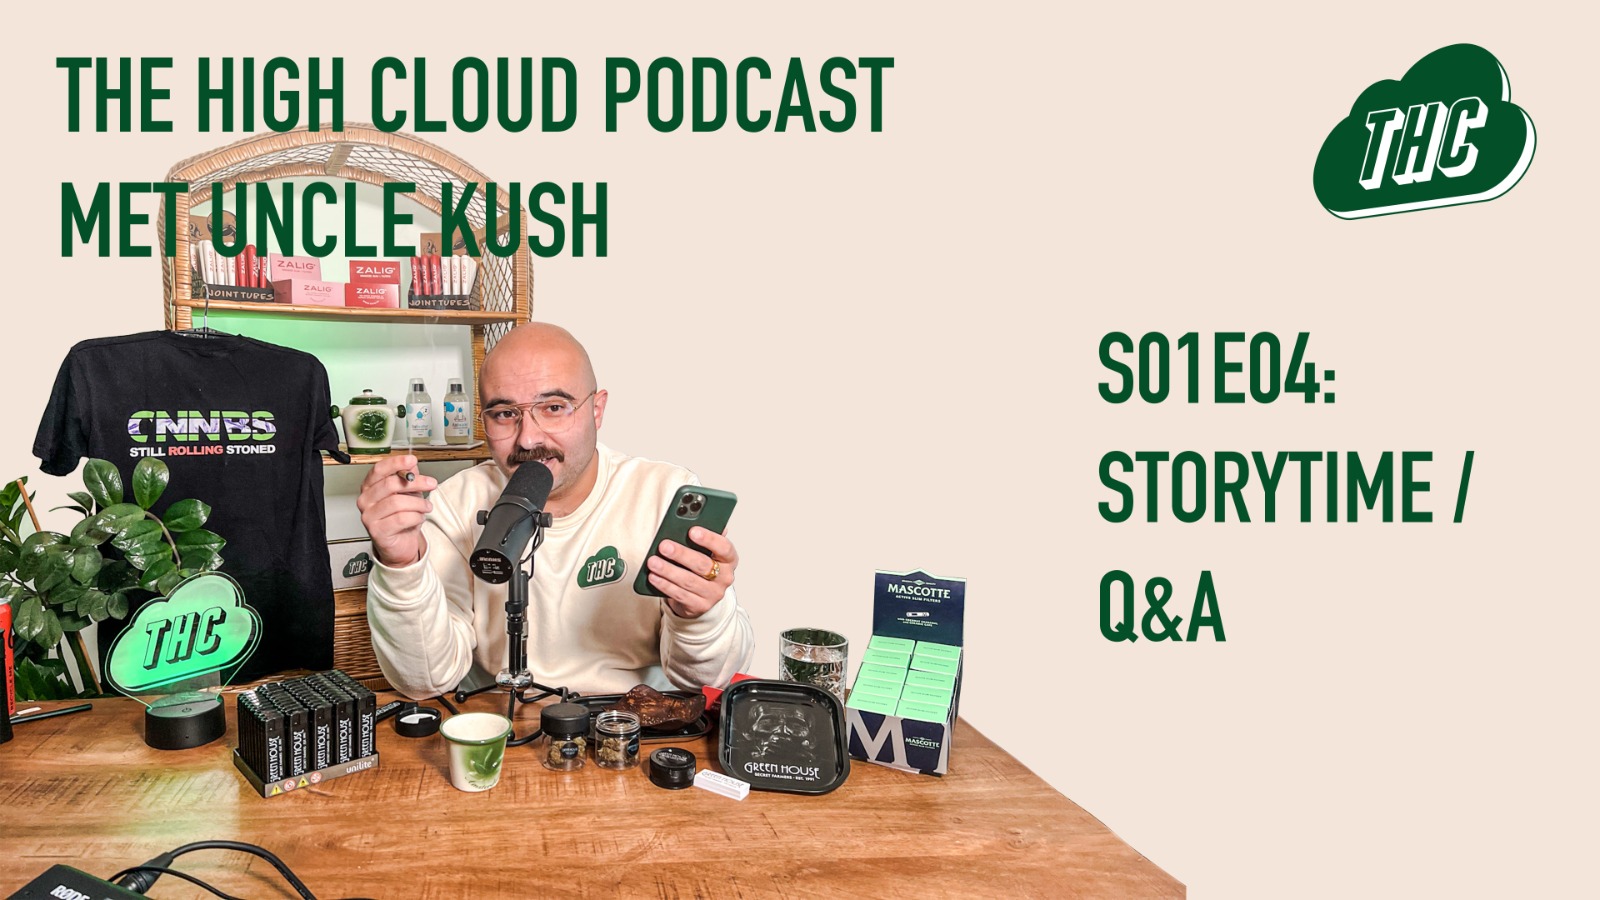 The High Cloud Podcast S01E04: Storytime / Q&A with Uncle Kush